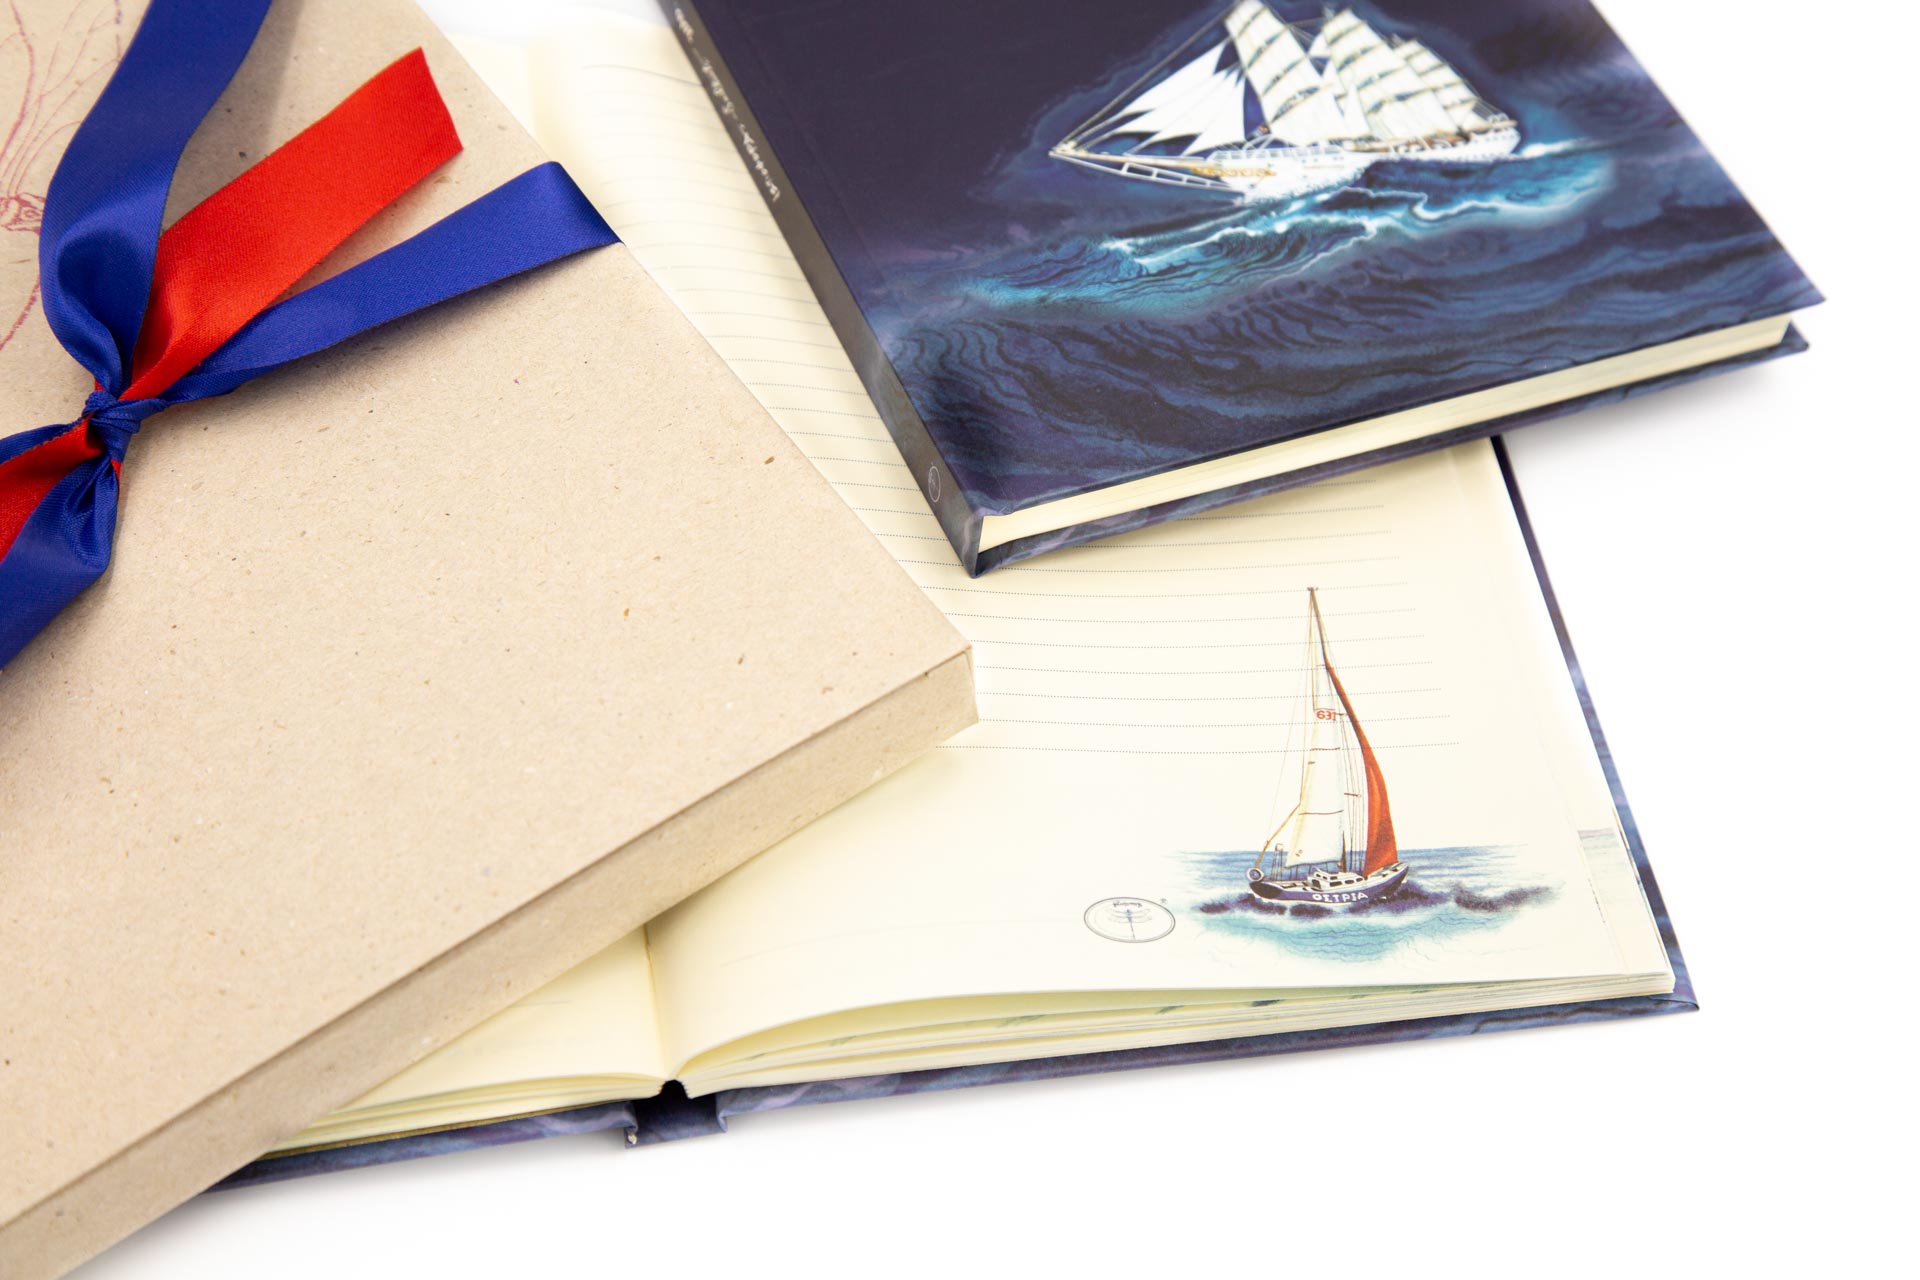 Personal notebook "Sailboats" - Details